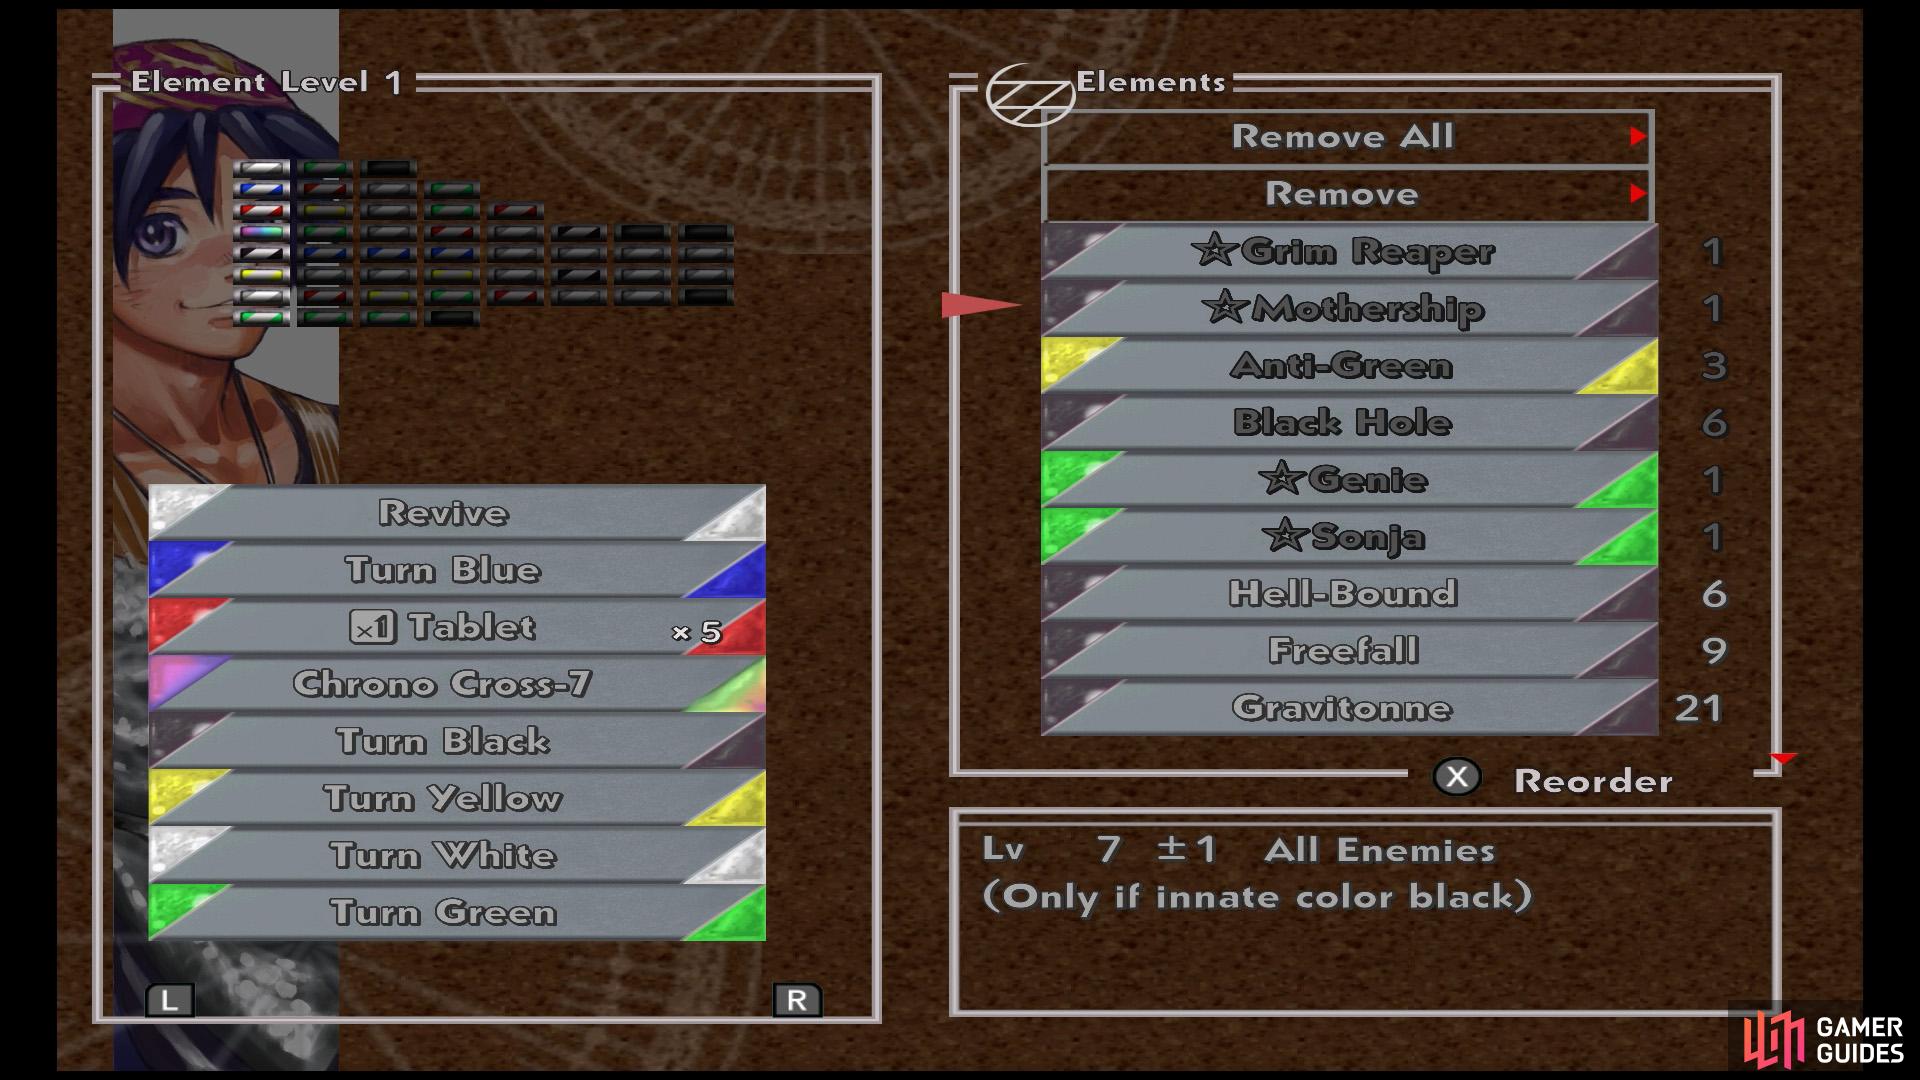 Give all your party members Level 1 Elements of every color, plus the Chrono Cross for Serge.